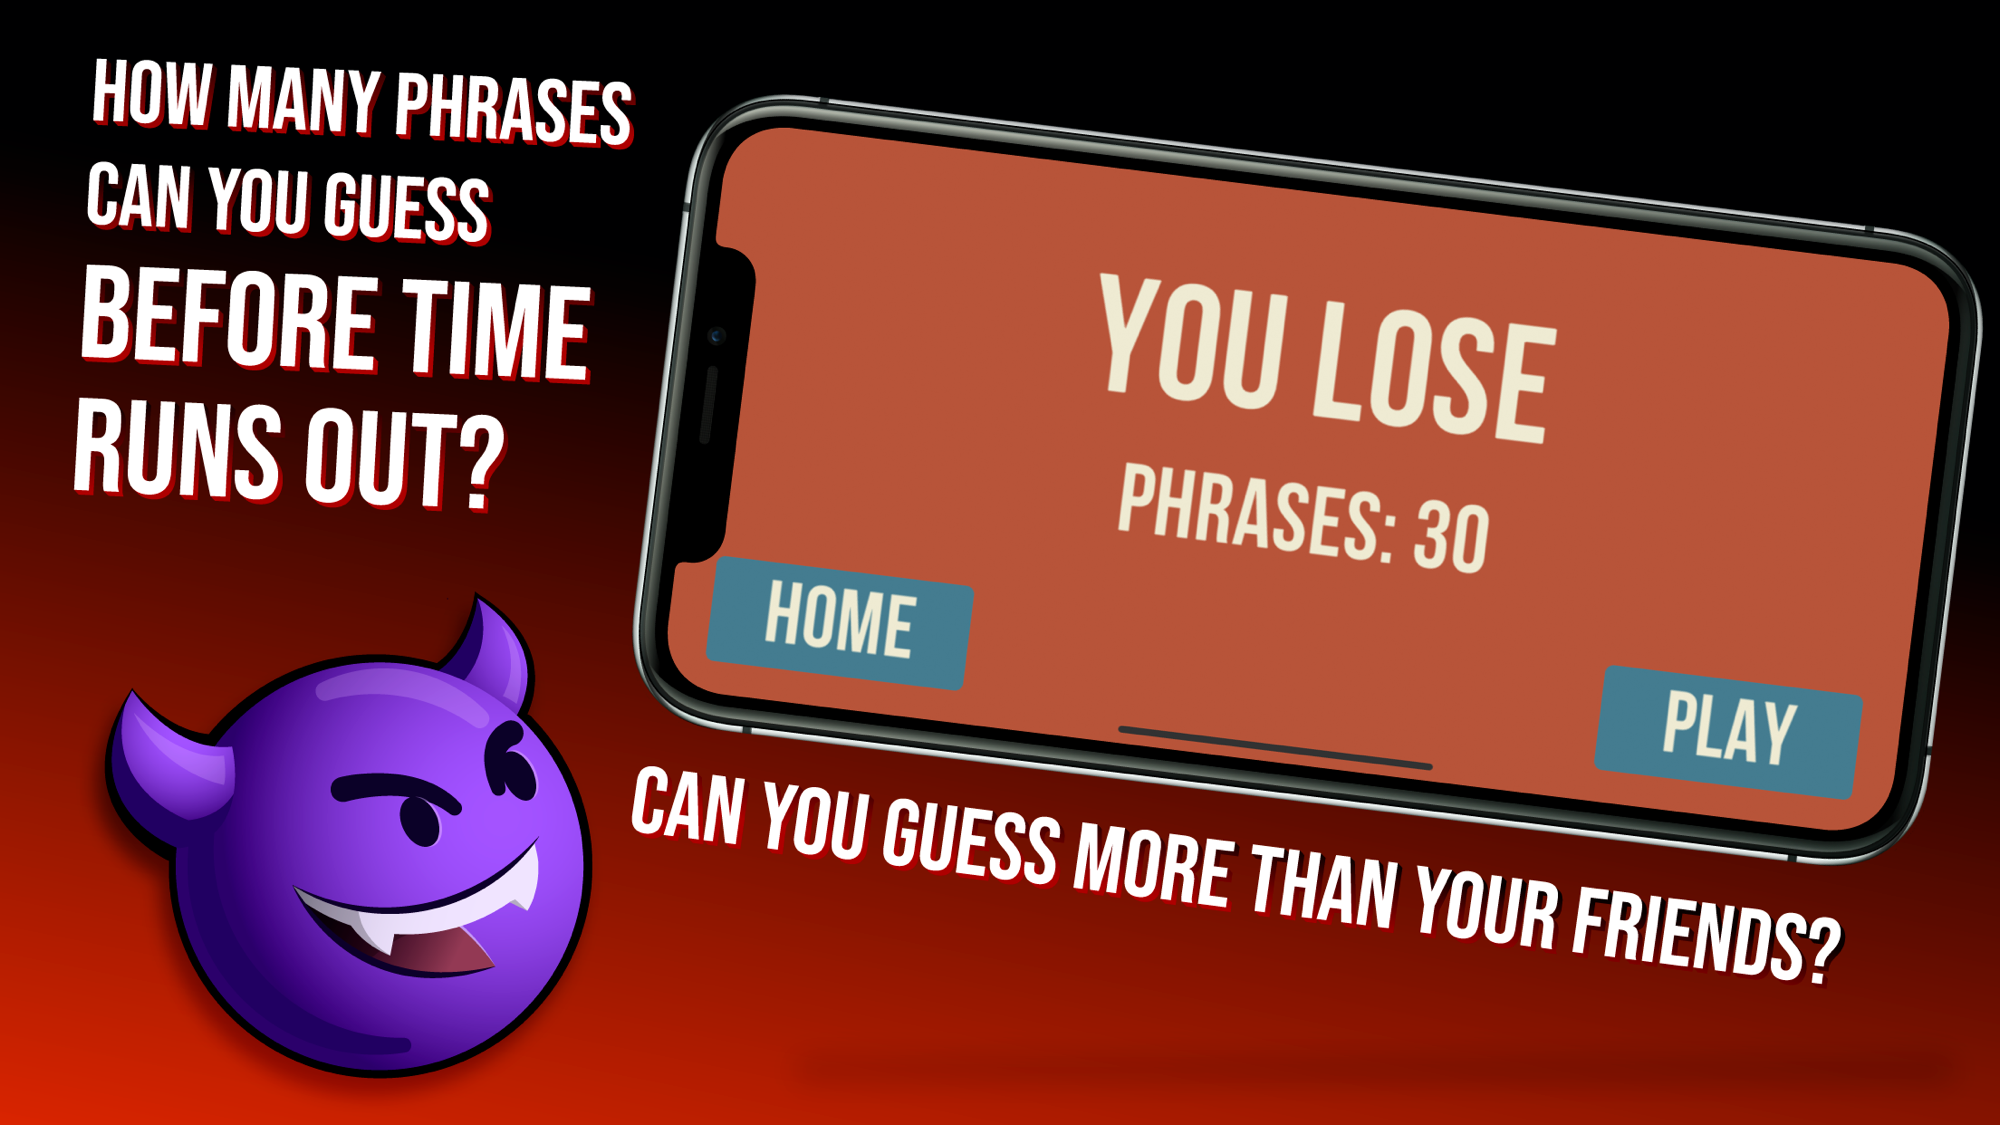 Catch Phrase for Adults  Featured Image for Version 